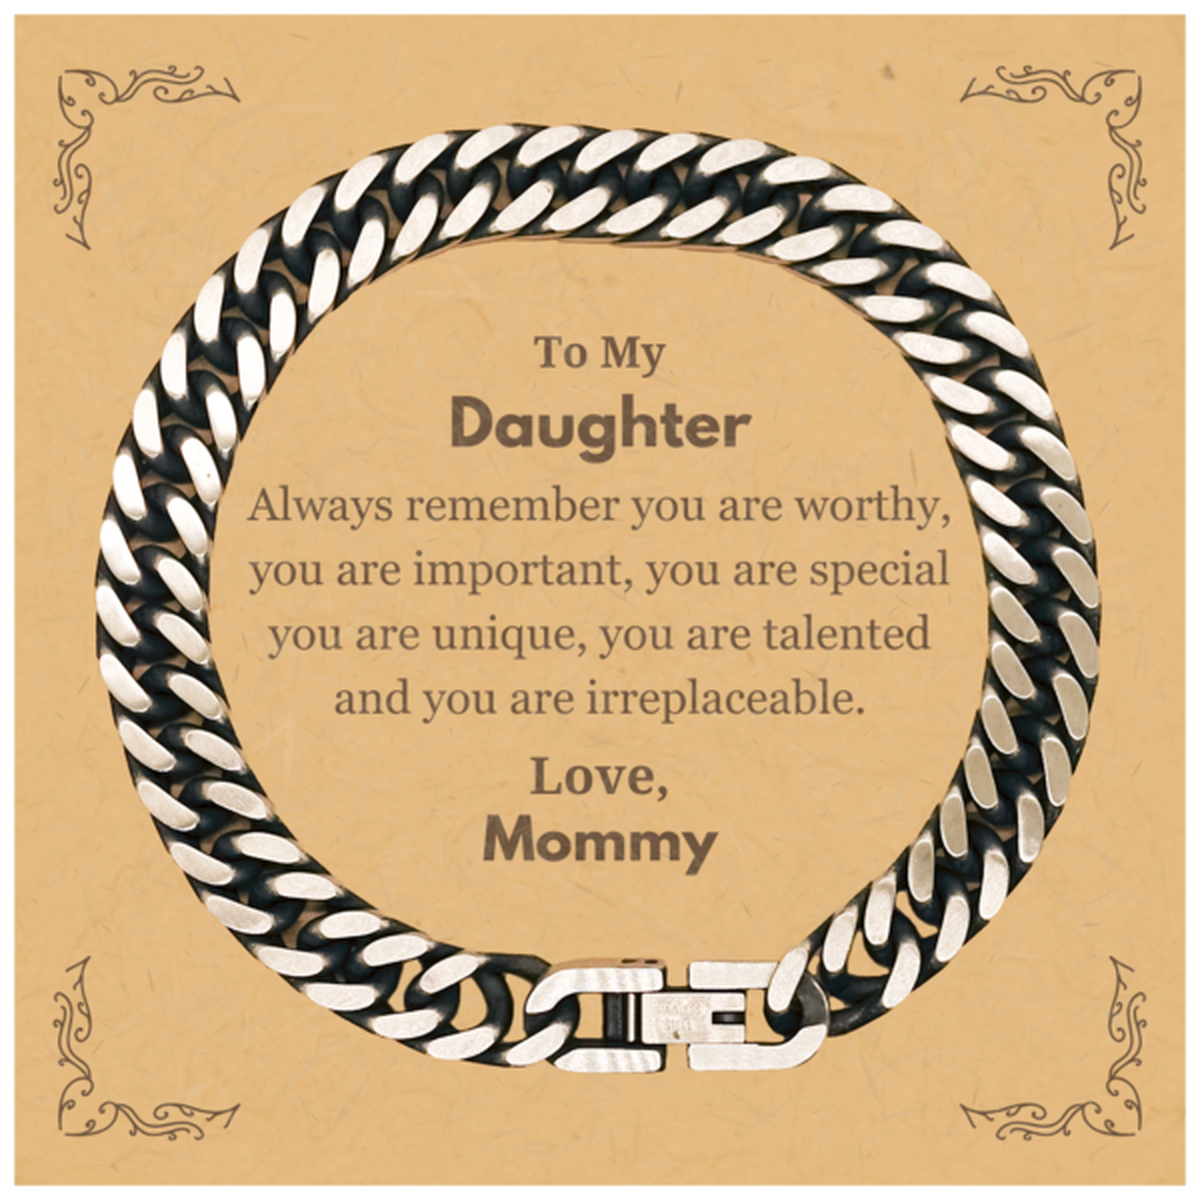 Daughter Birthday Gifts from Mommy, Inspirational Cuban Link Chain Bracelet for Daughter Christmas Graduation Gifts for Daughter Always remember you are worthy, you are important. Love, Mommy